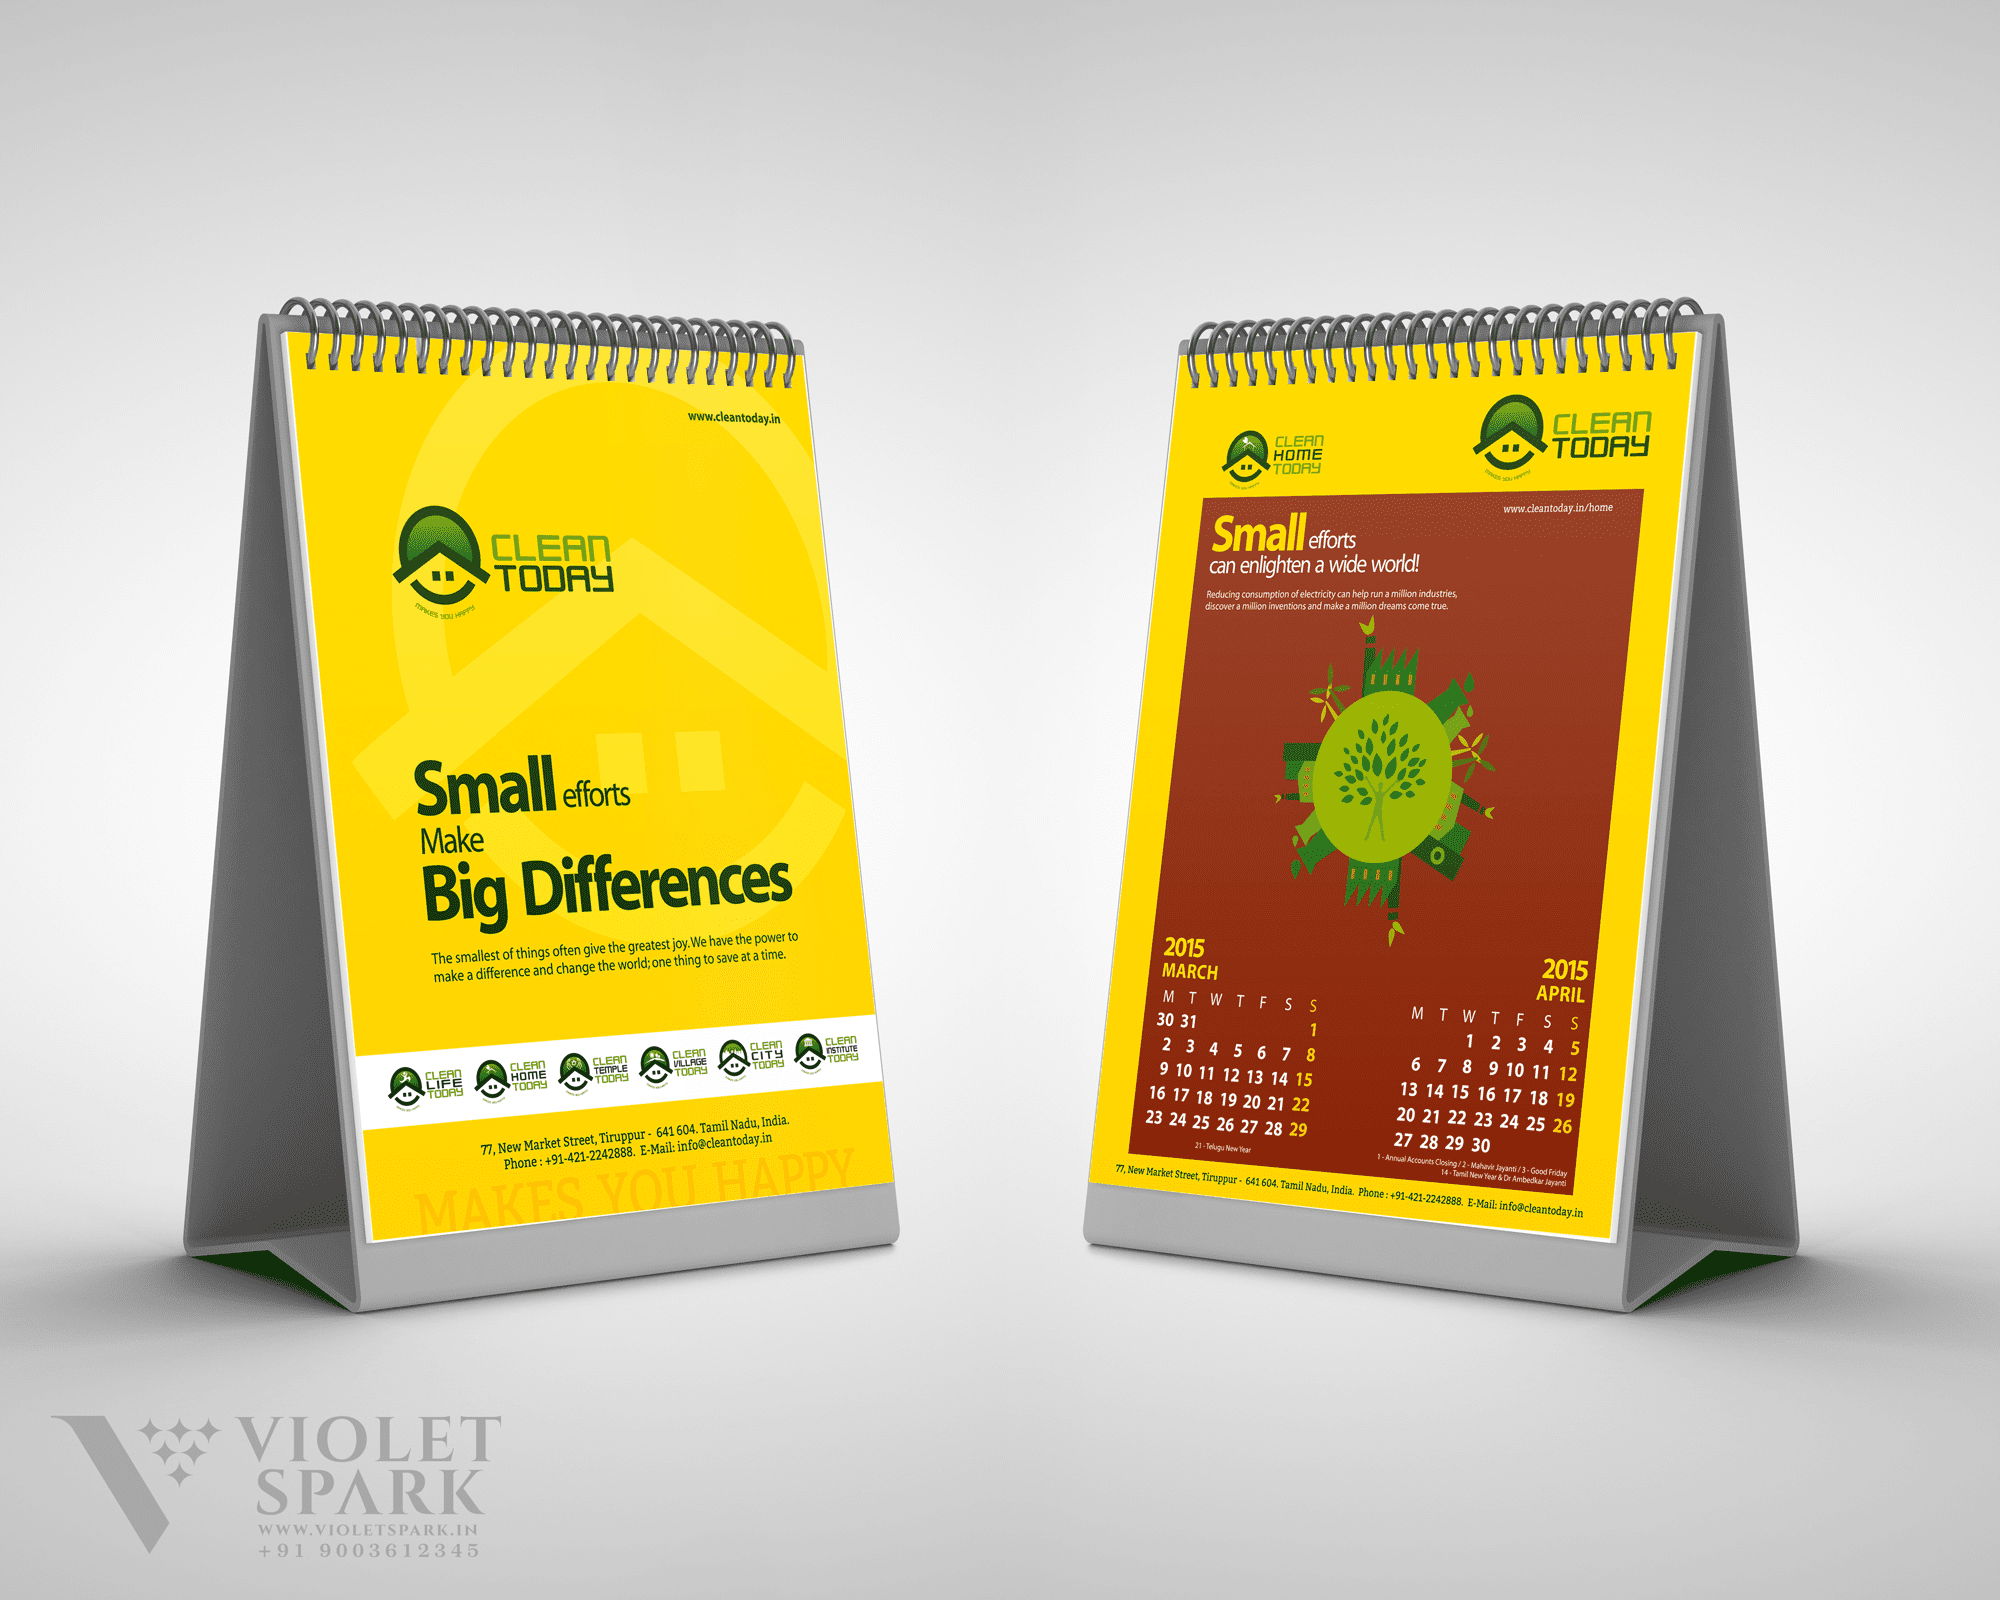 Clean Today by The Chennai Silk, Calendar Branding Packaging Design Digital Marketing in Bangalore by Violet Spark